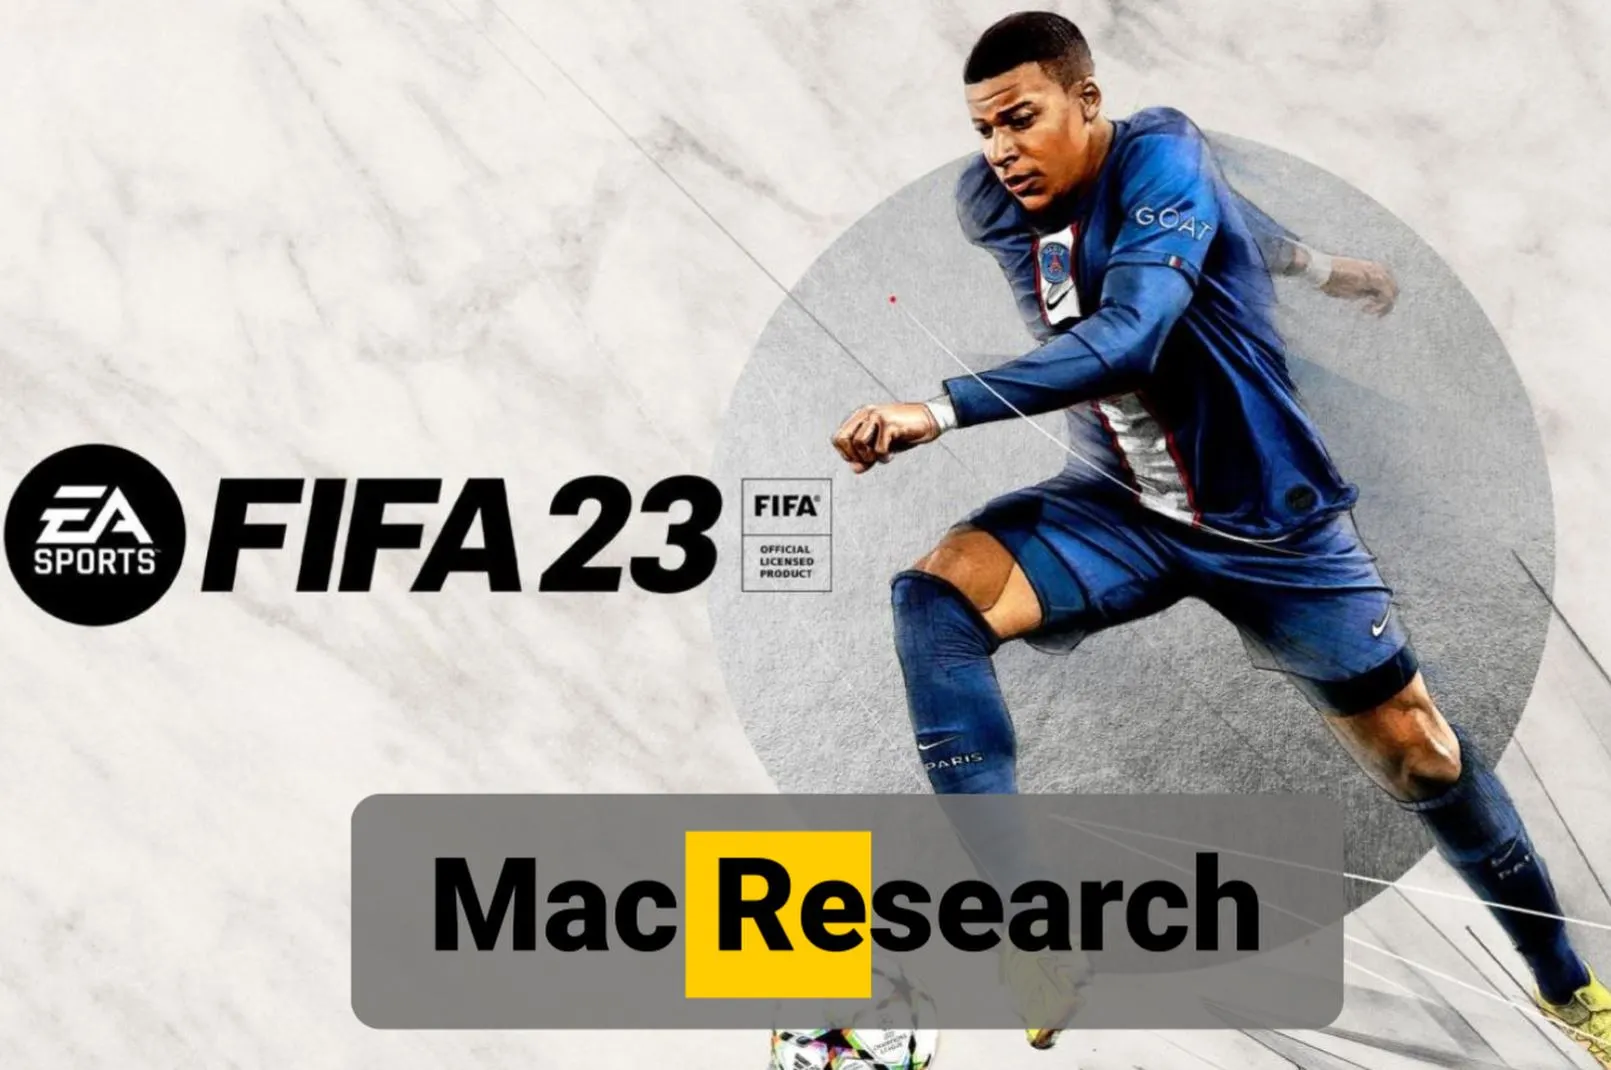 Guides To Download And Play Fifa 2018 (Fifa 18) Apk + Obb Data